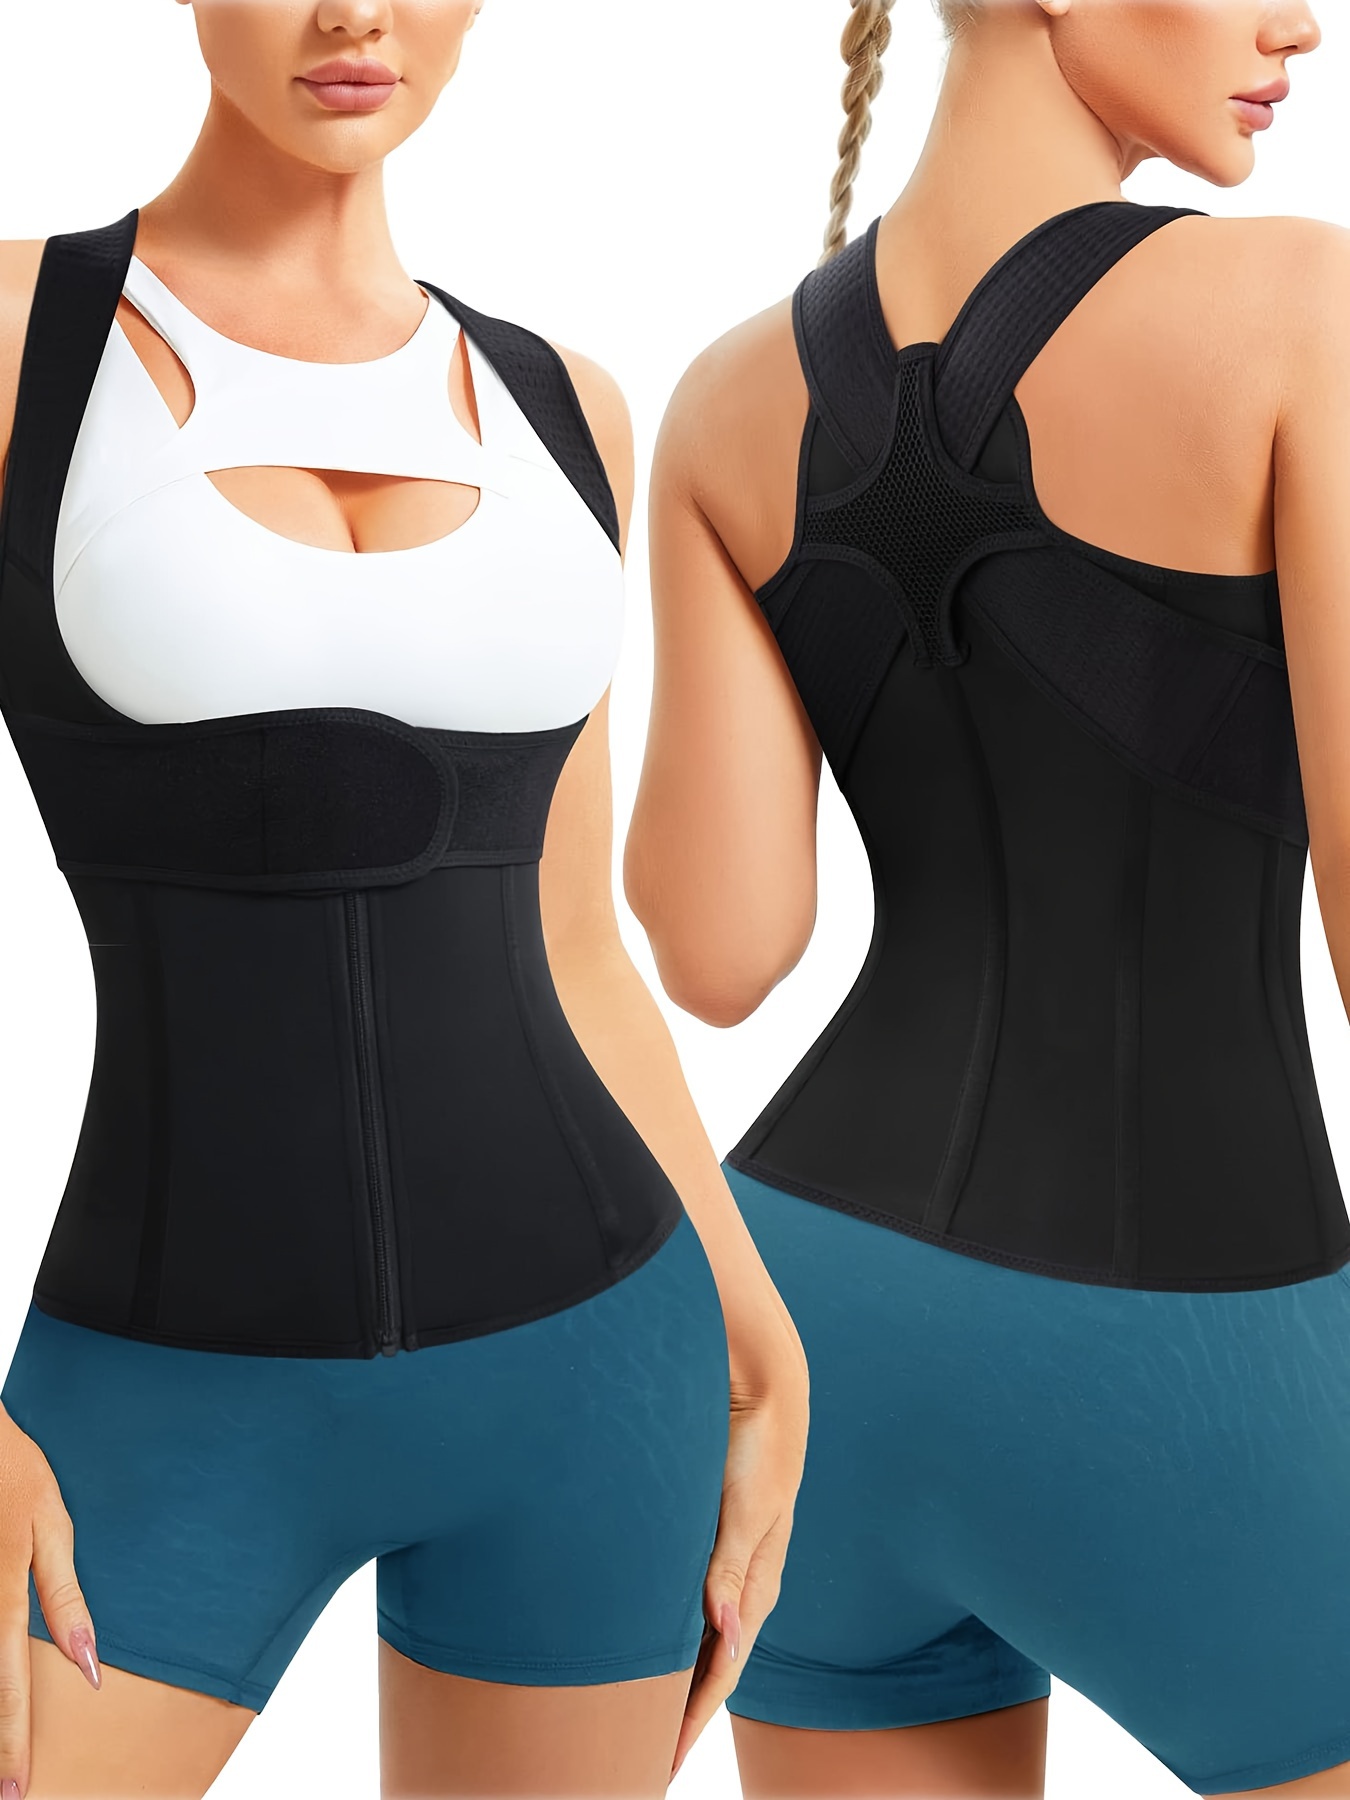 Compression Waist Shaping Camisole Bodyshaper For Women COMFREE